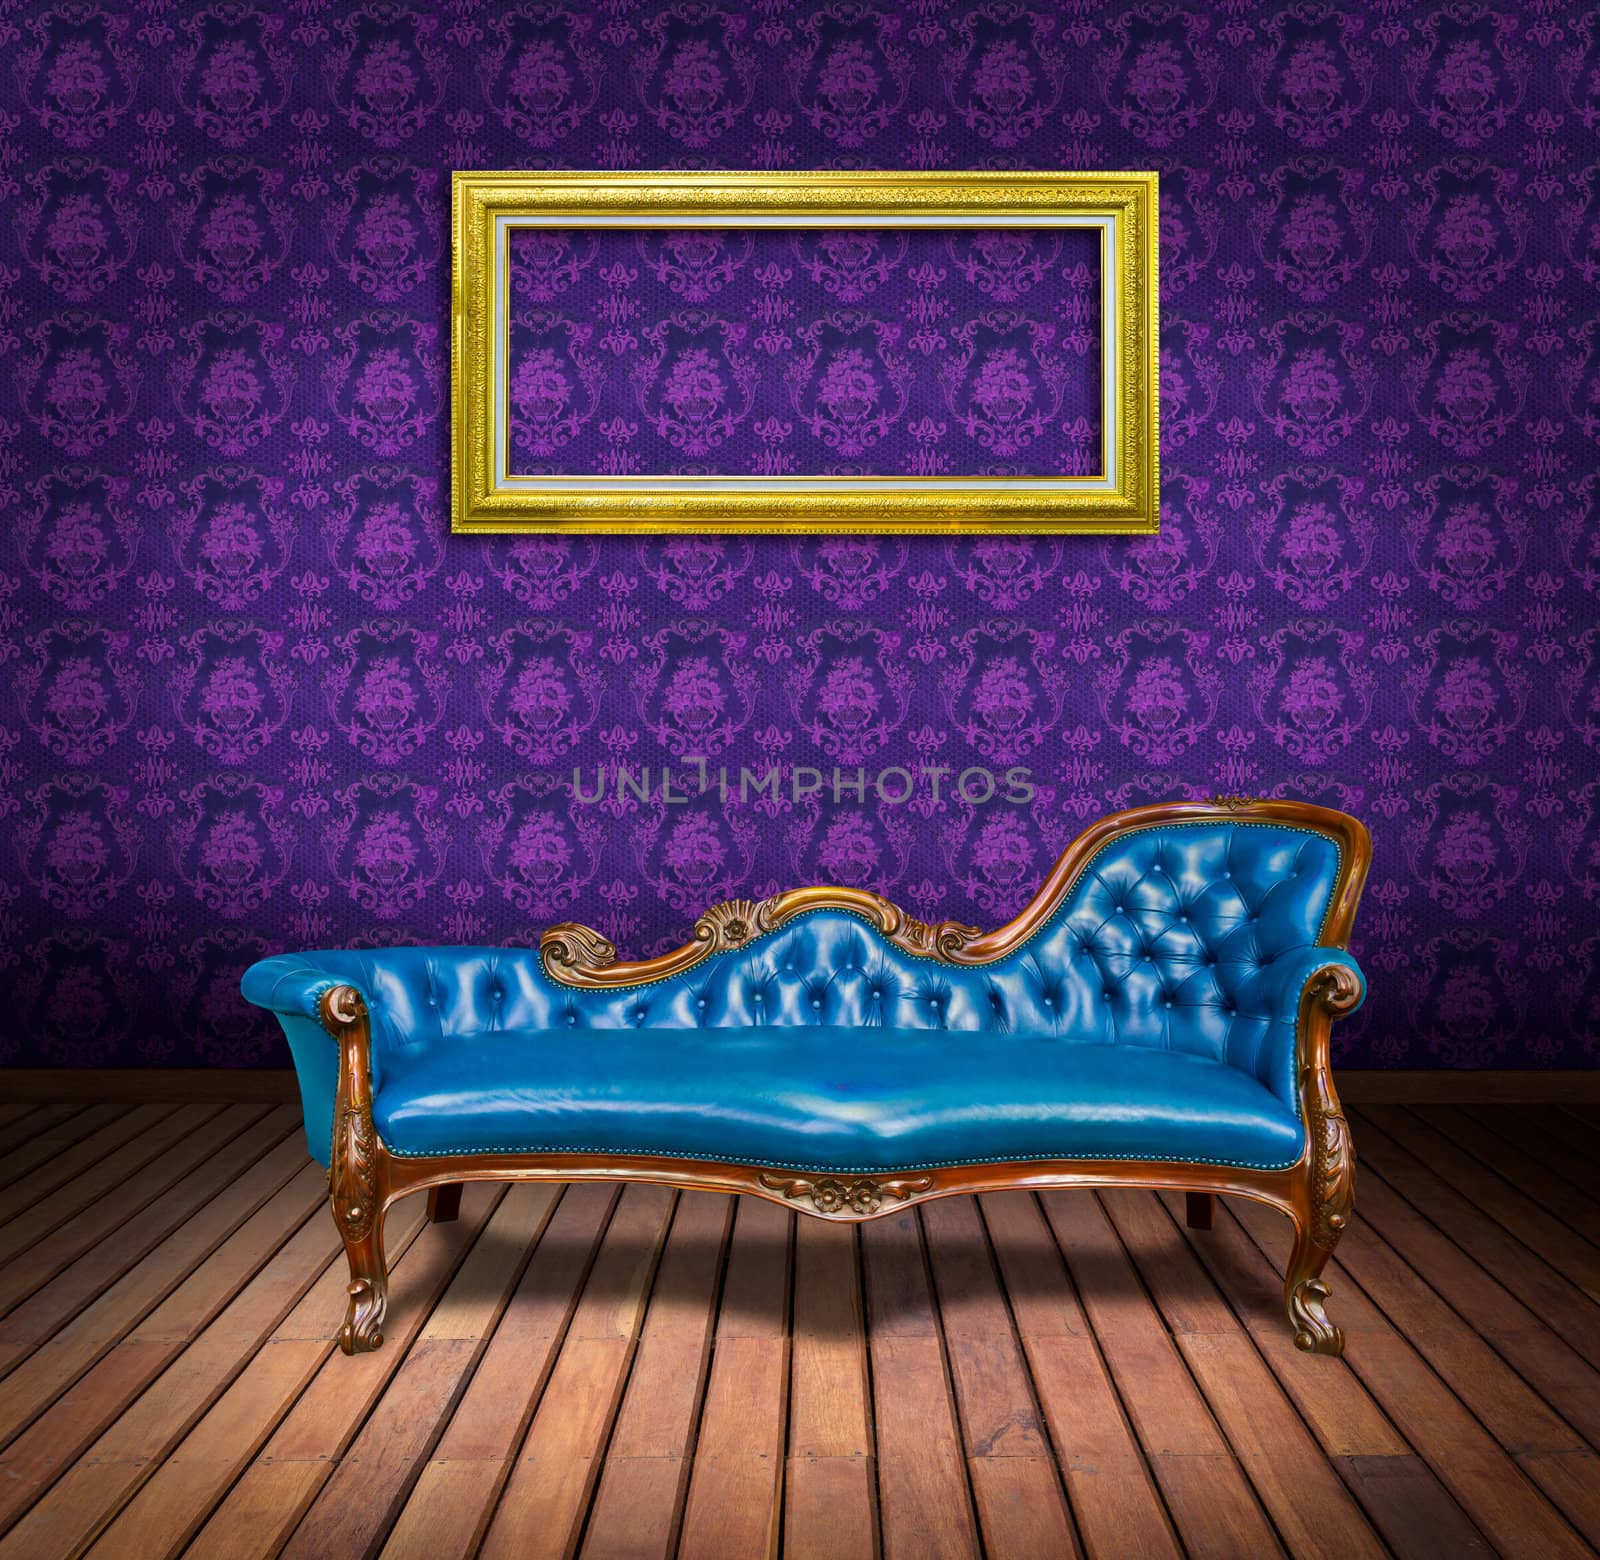 vintage luxury armchair and frame in room by tungphoto